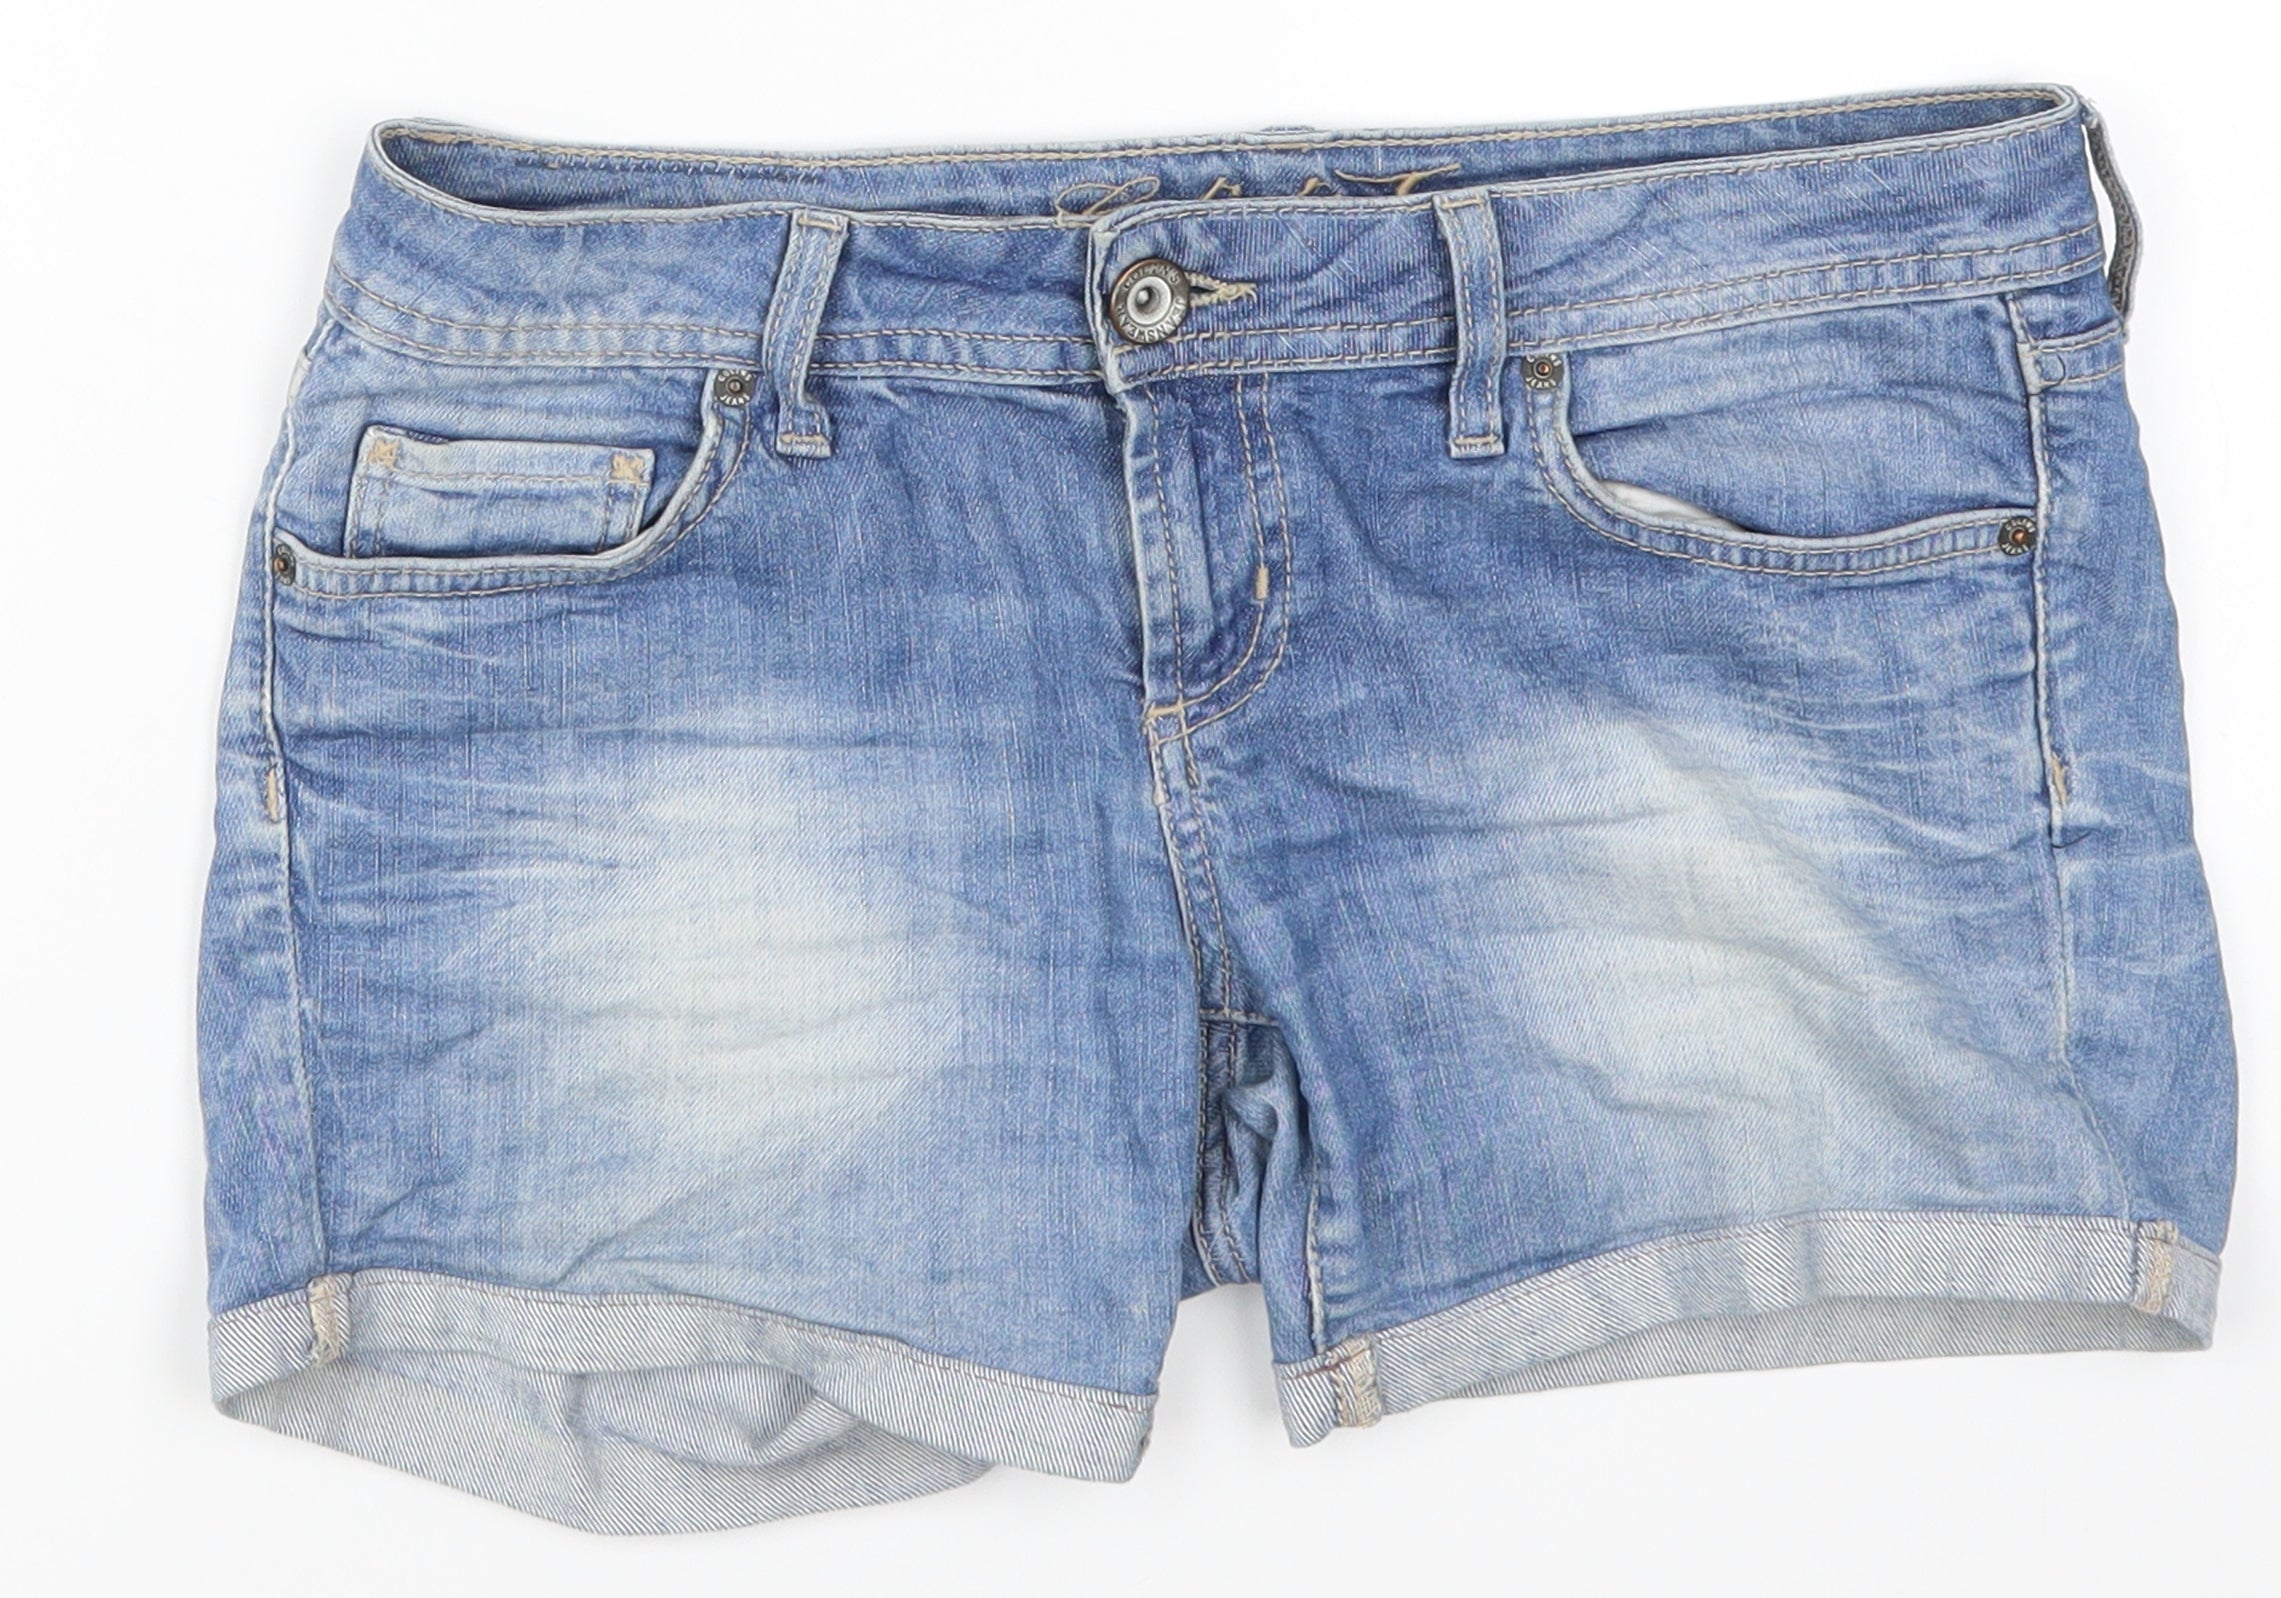 Buy Women Stretchable Denim Hot Pants (Shorts) - MID Rise - Dark Blue/Mid  Blue Color - Waist Size to fit 26